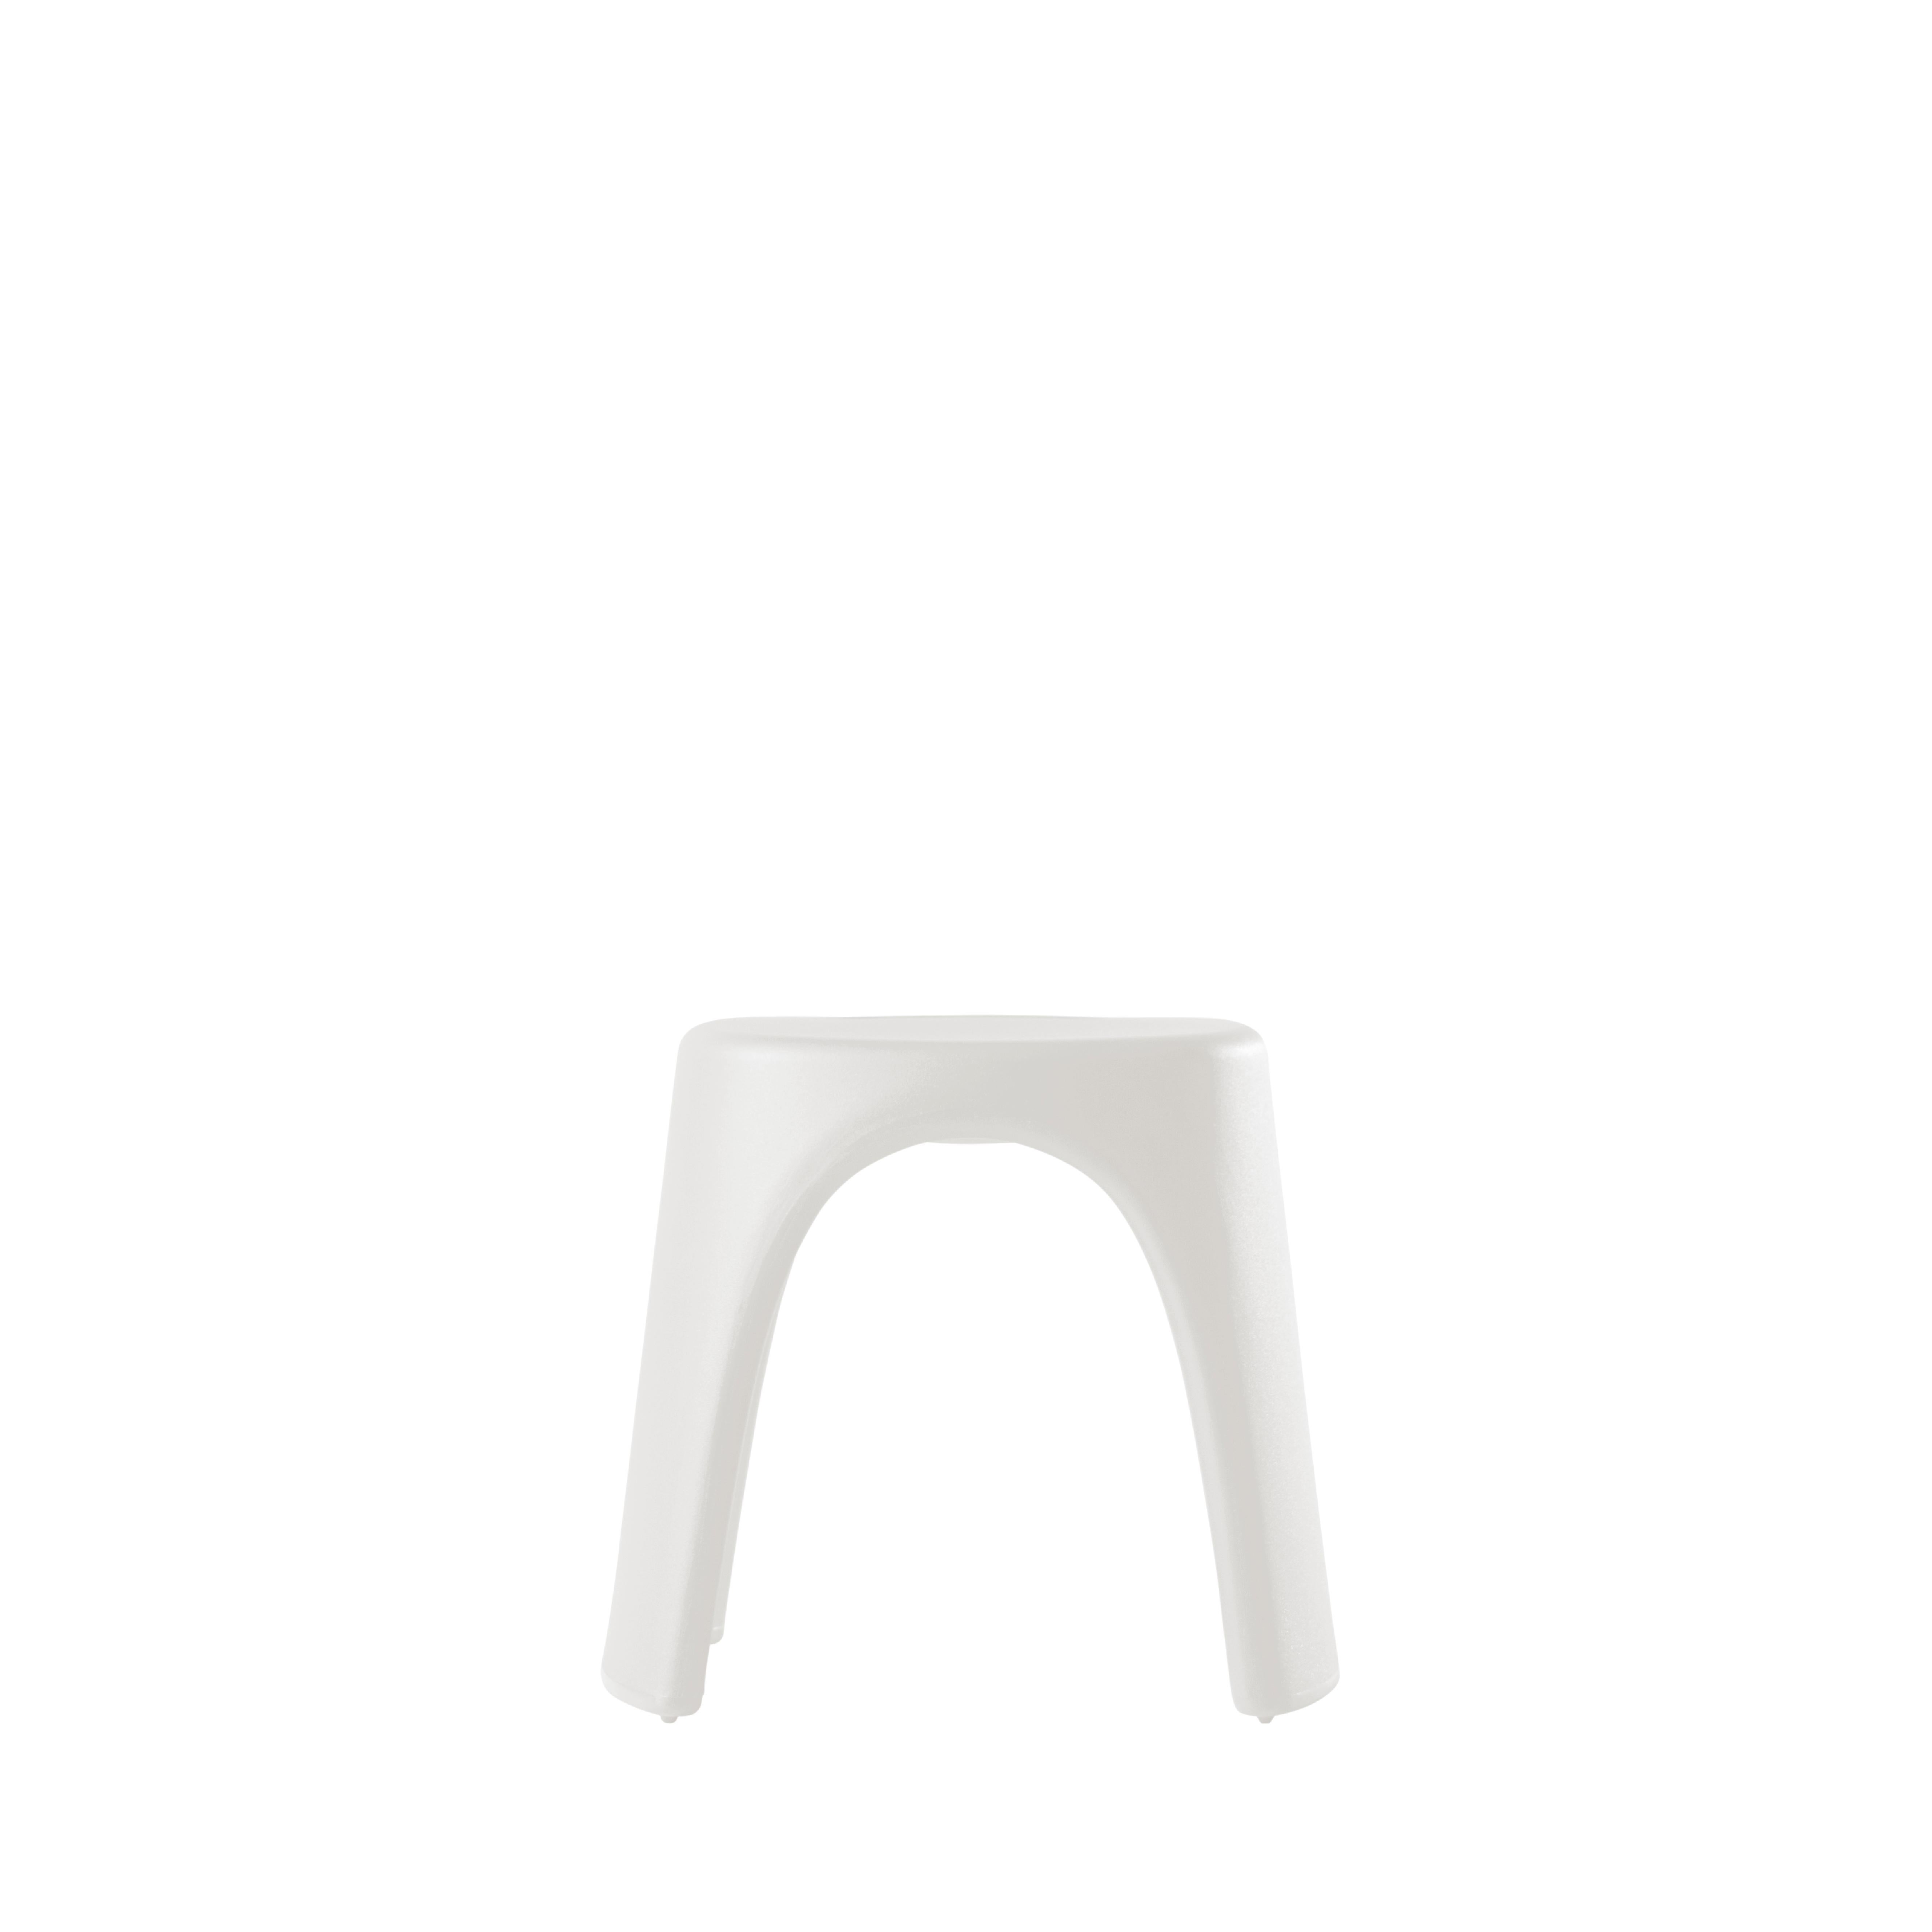 Pumpkin Orange Amélie Sgabello Stool by Italo Pertichini
Dimensions: D 40 x W 46 x H 43 cm.
Materials: Polyethylene.
Weight: 4 kg.

Available in a standard version and lacquered version. Prices may vary. Available in different color options. This